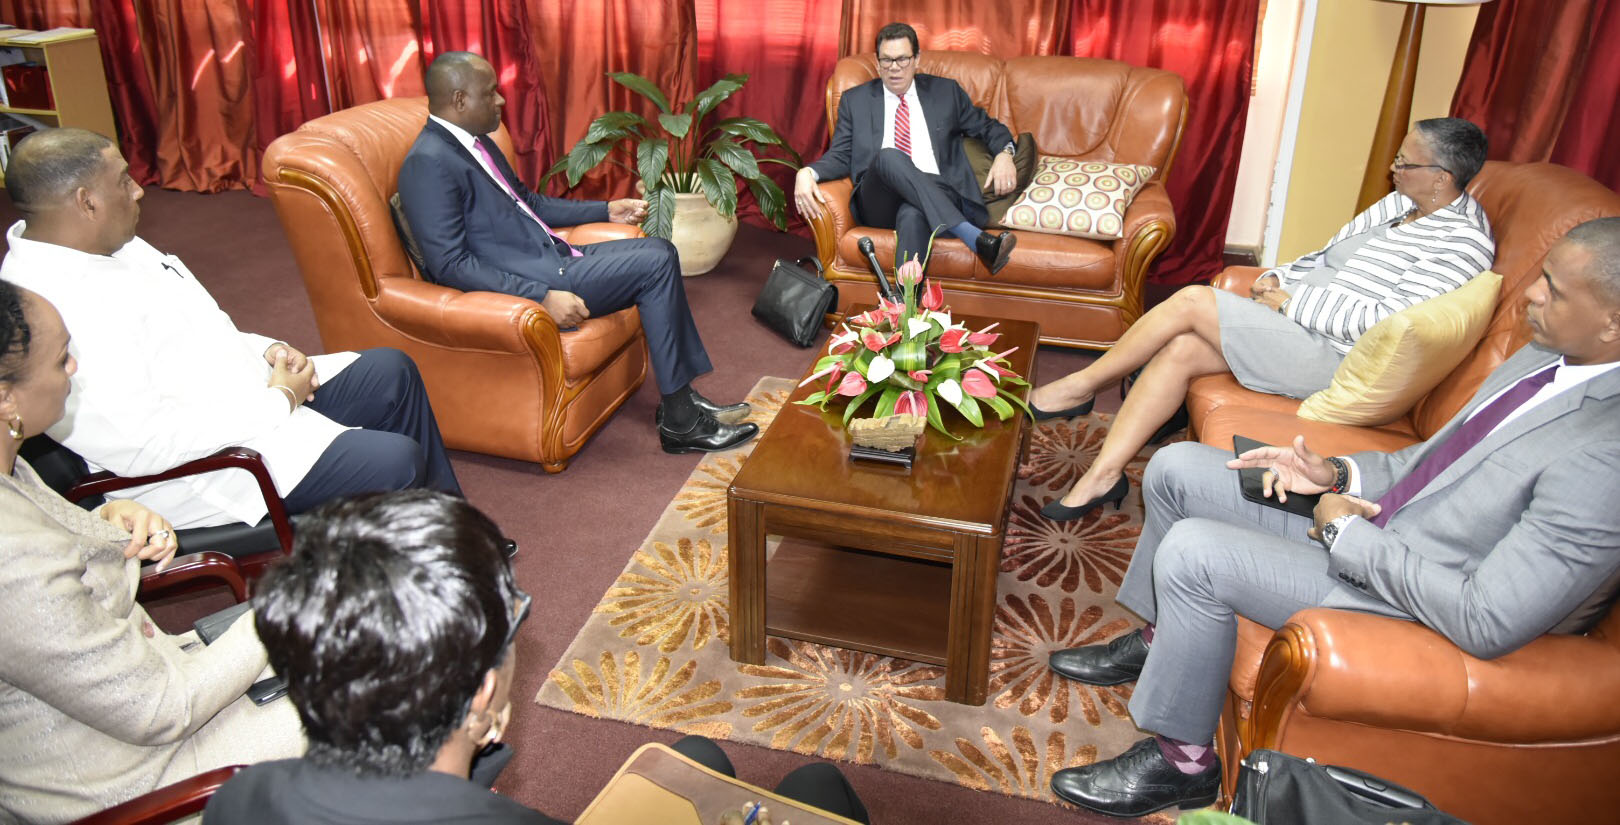 The delegation from CDB and officials from the Government of Dominica meet at the Office of the Prime Minister on September 14, 2017.